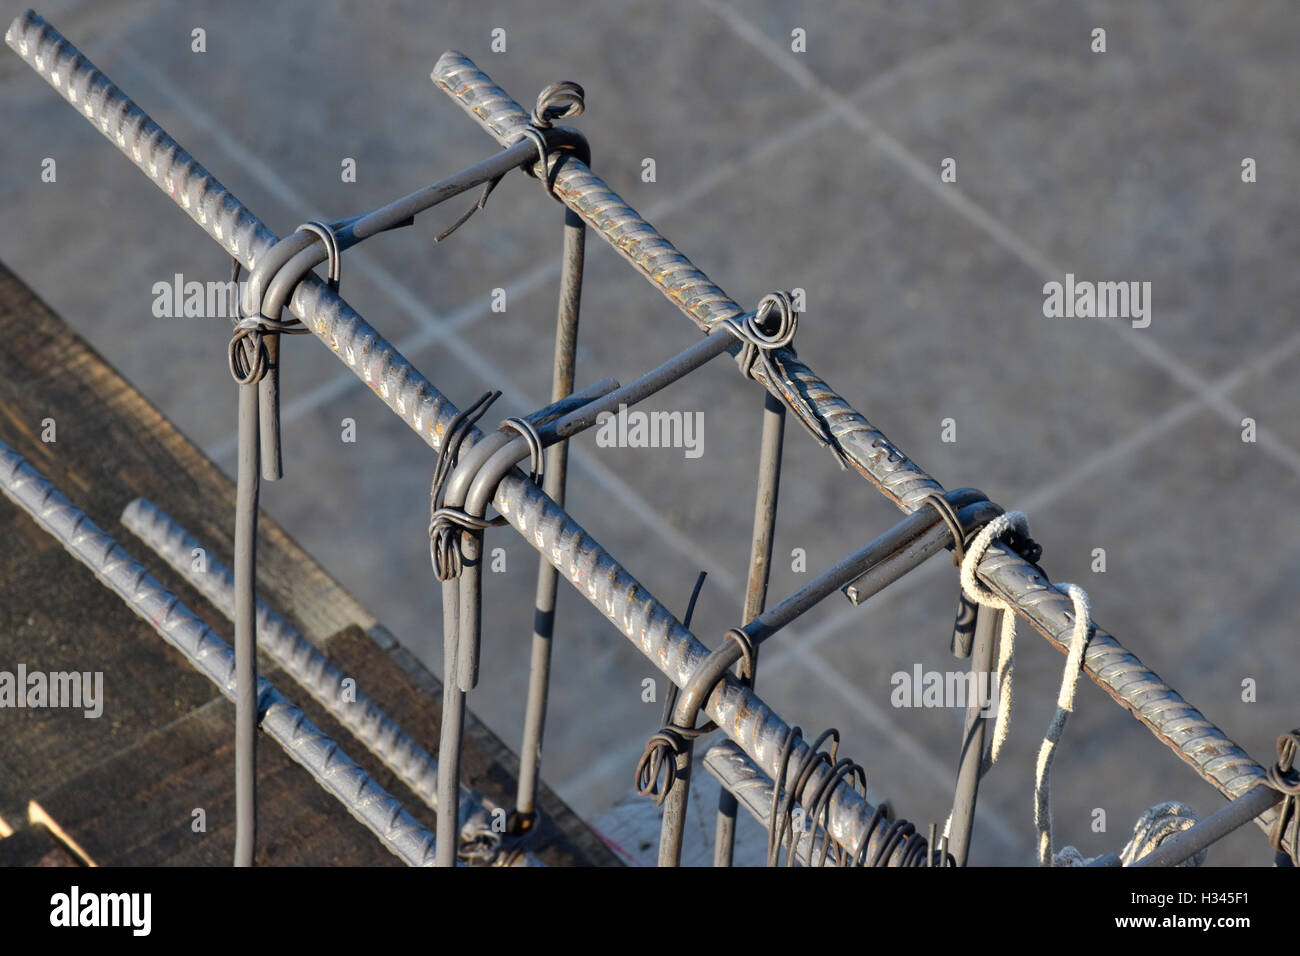 Rebar being used to make cement columns Stock Photo, Royalty Free Image